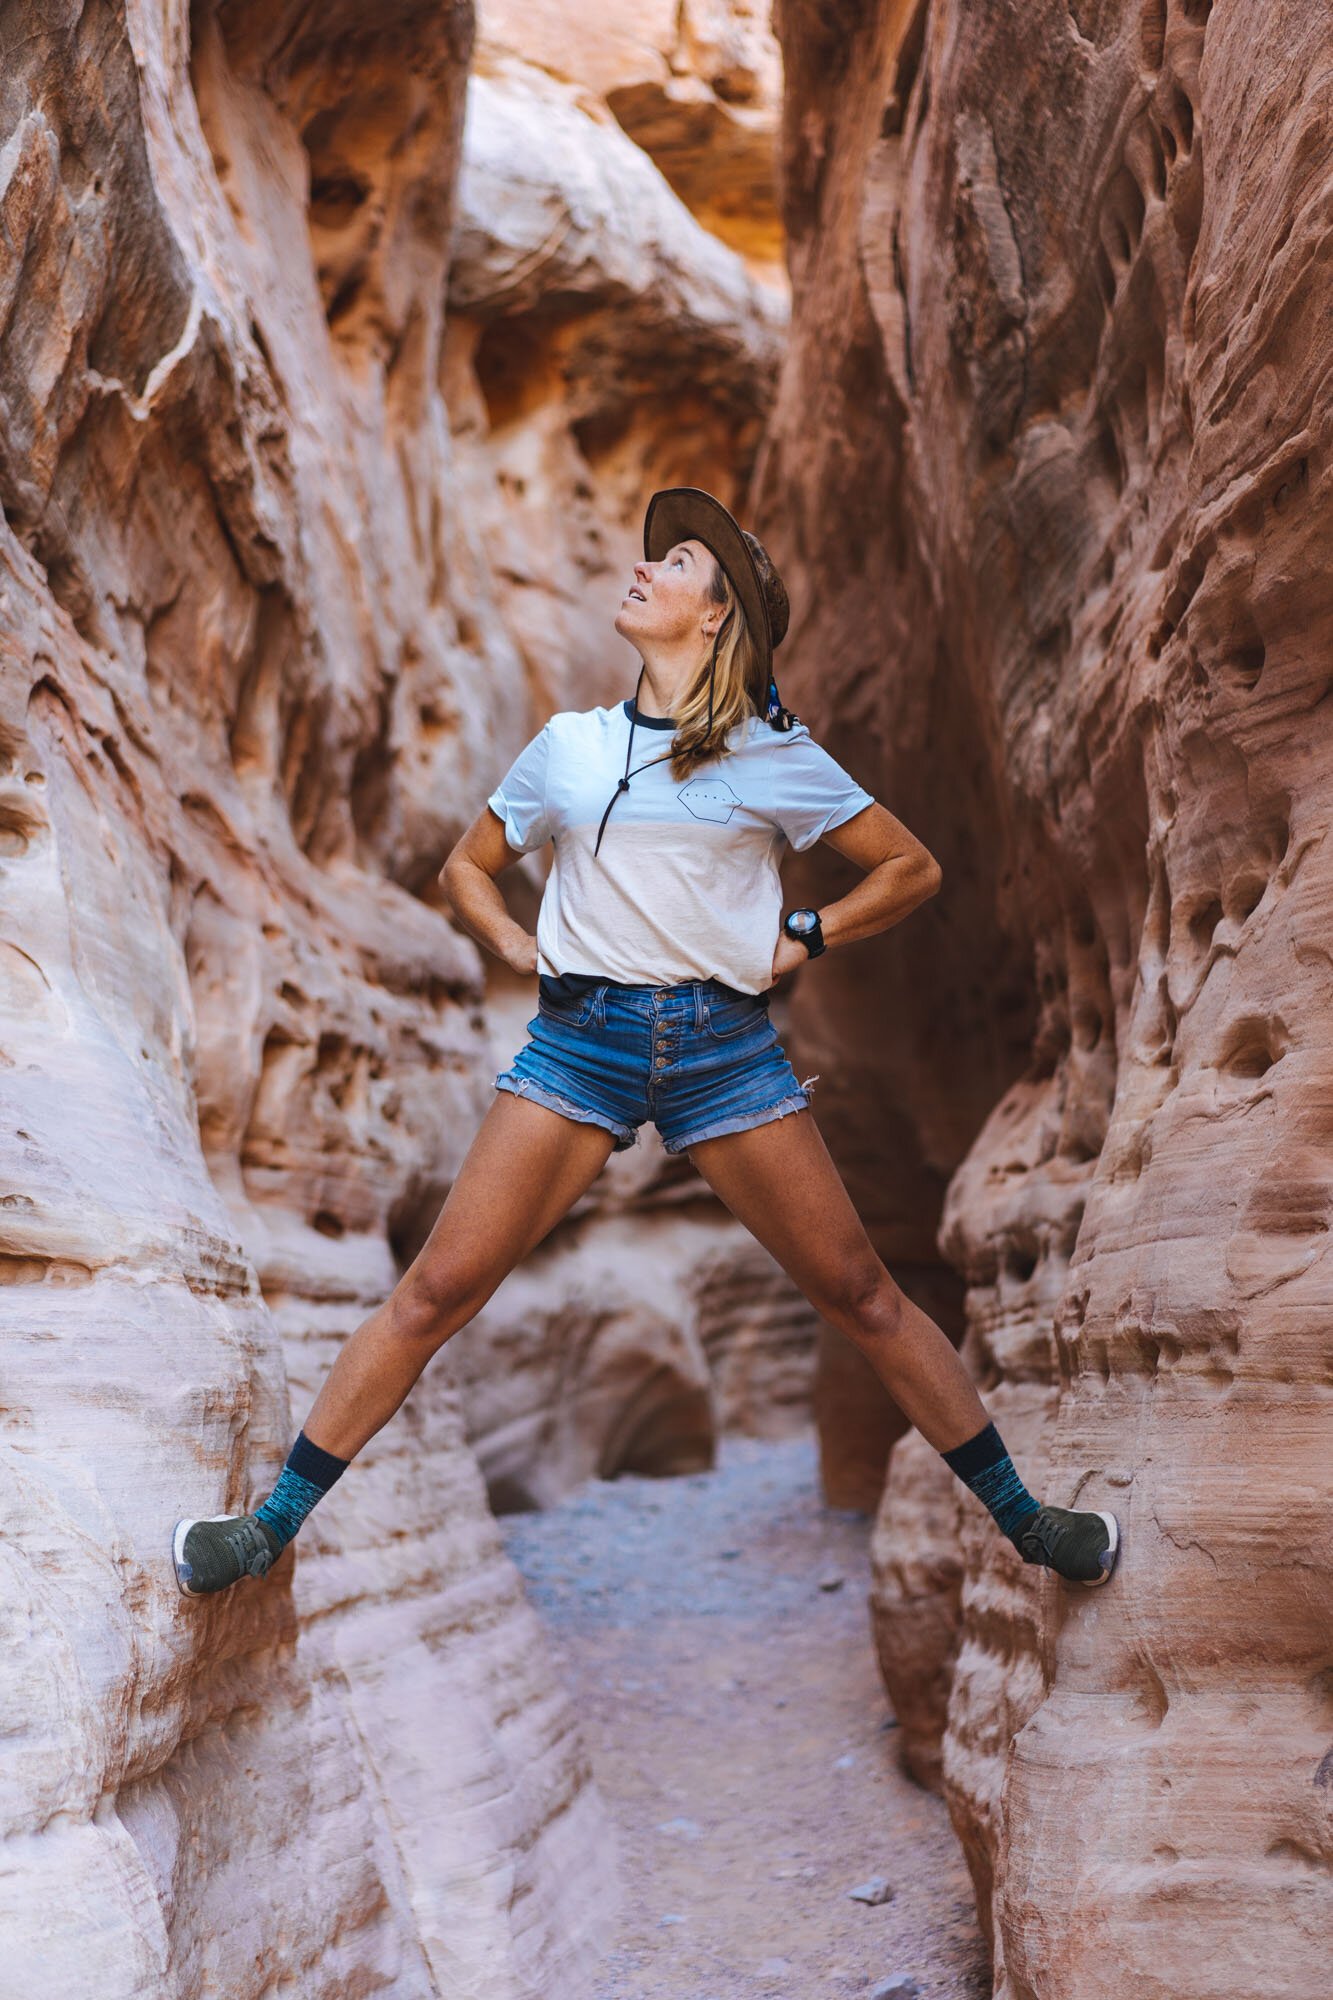 MAK in a slot canyon in Valley of Fire